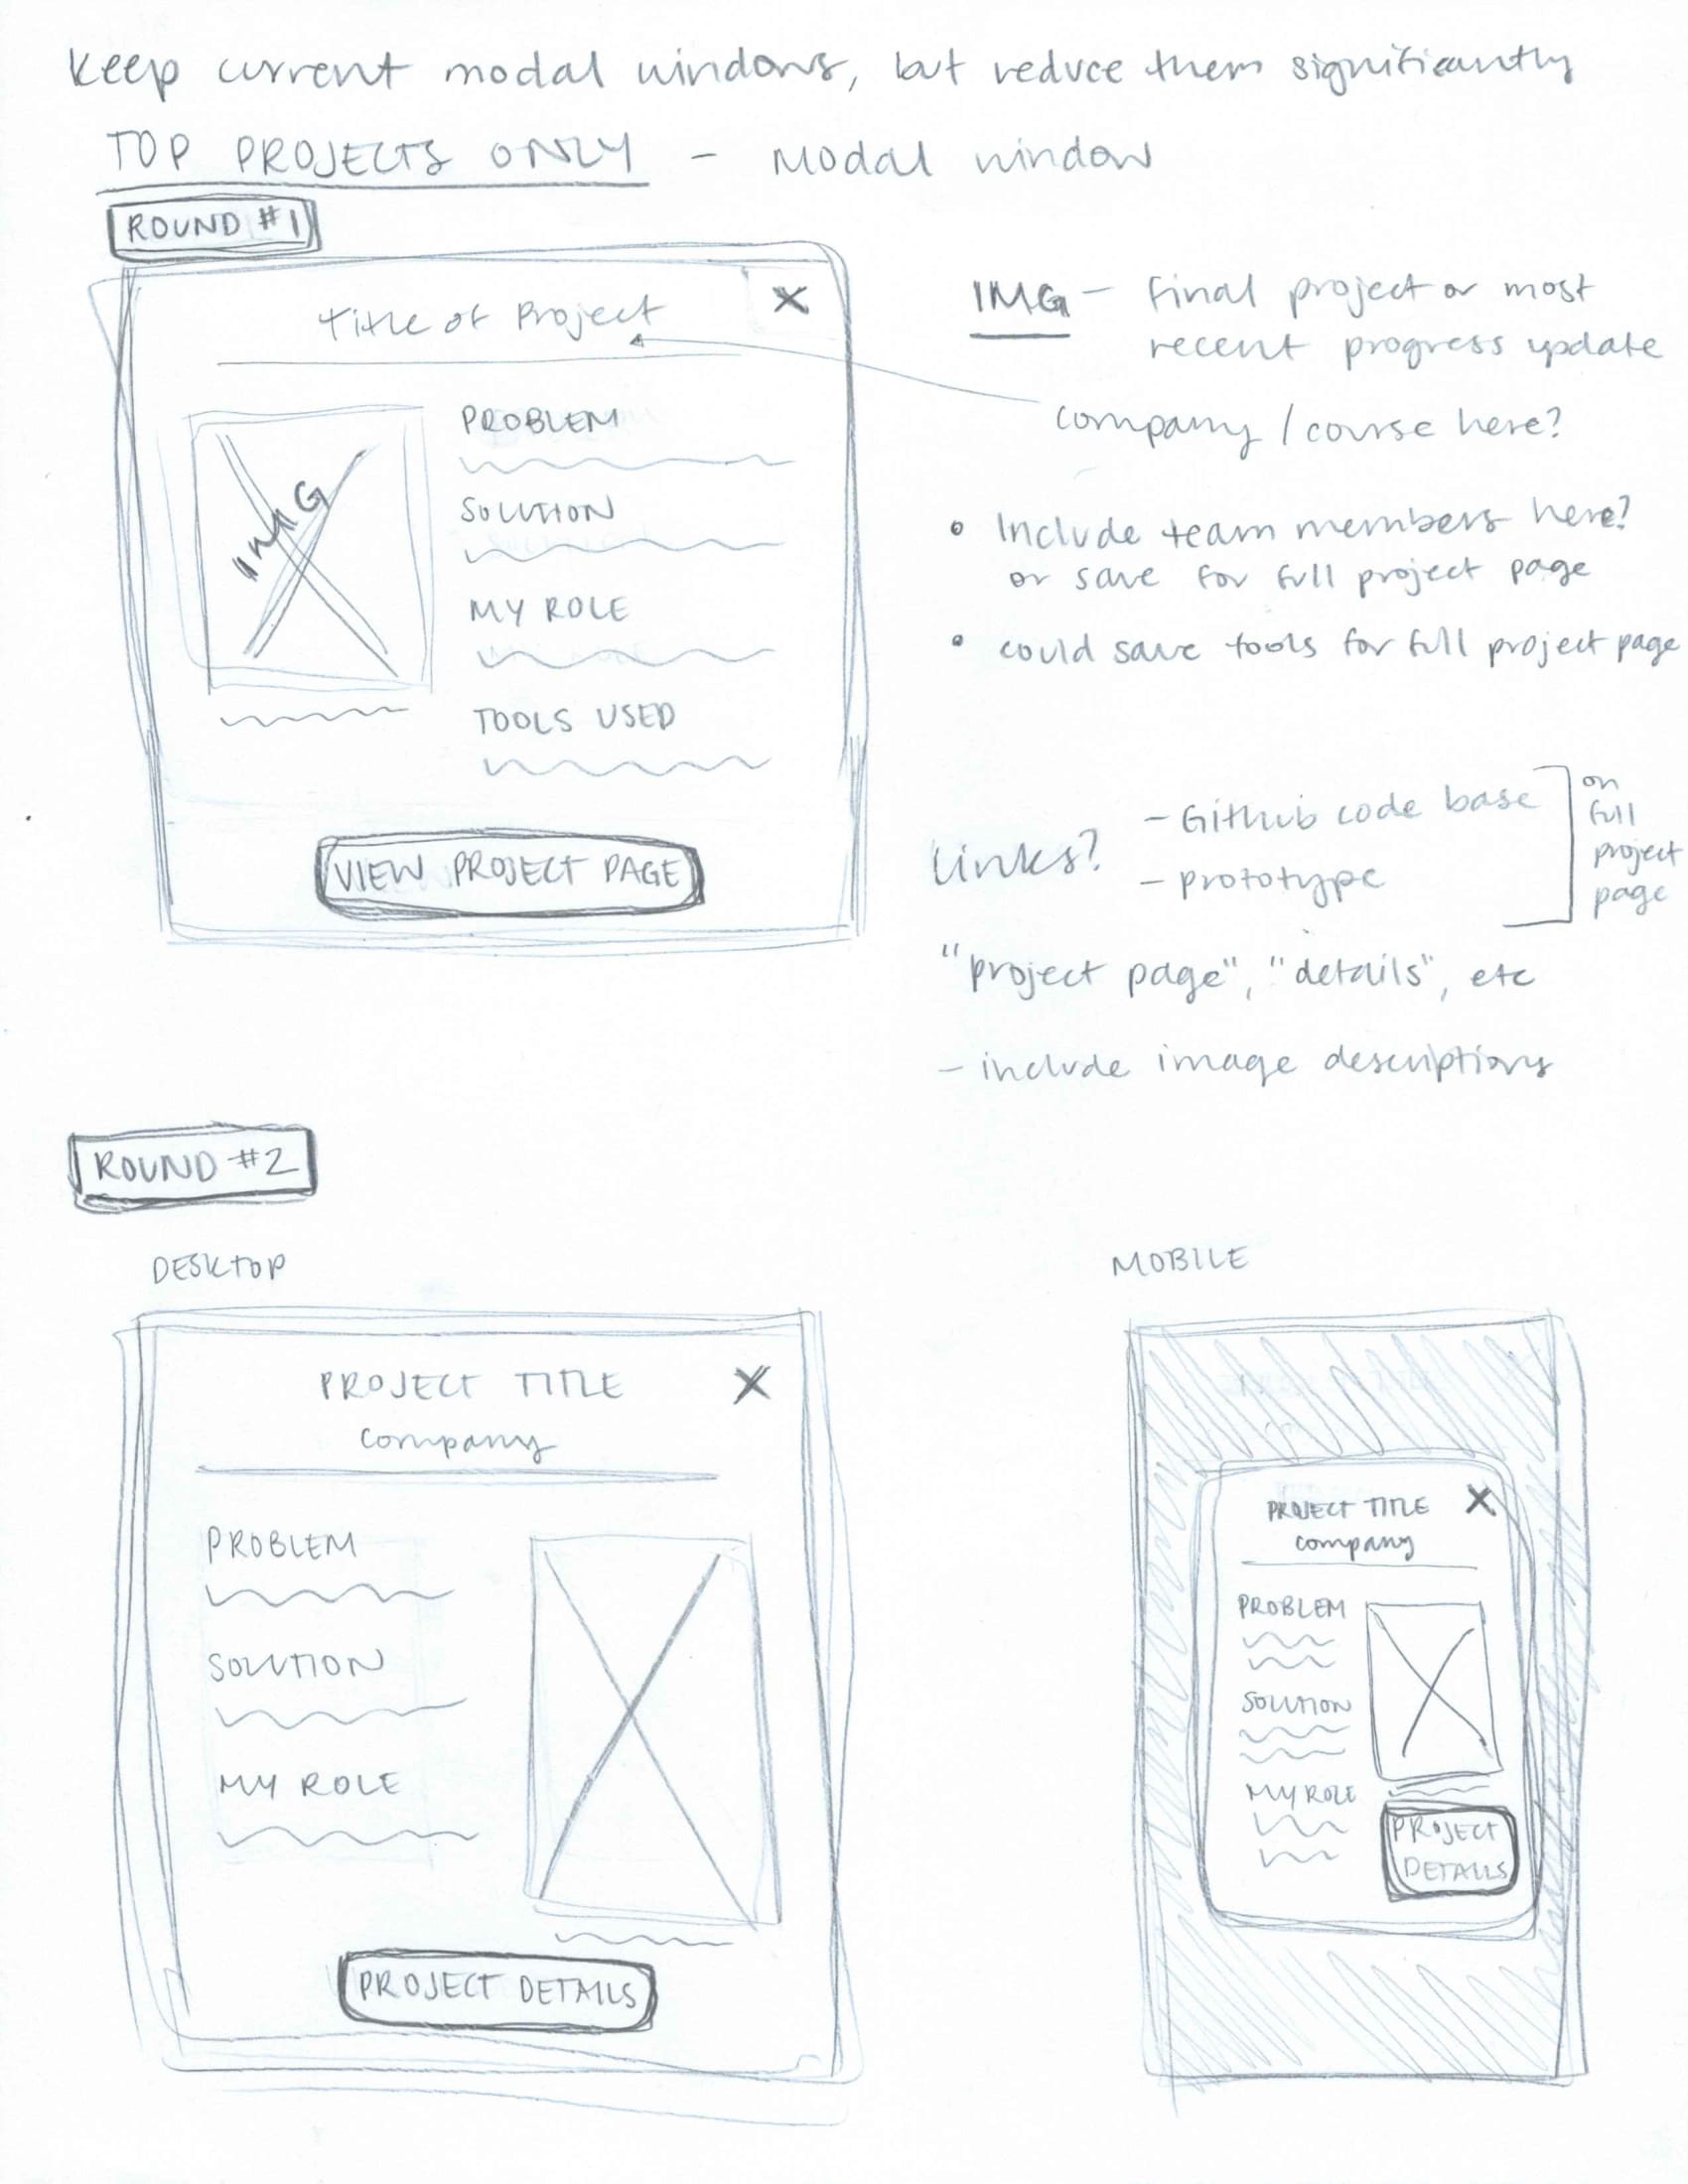 Sketches of a potential modal window design